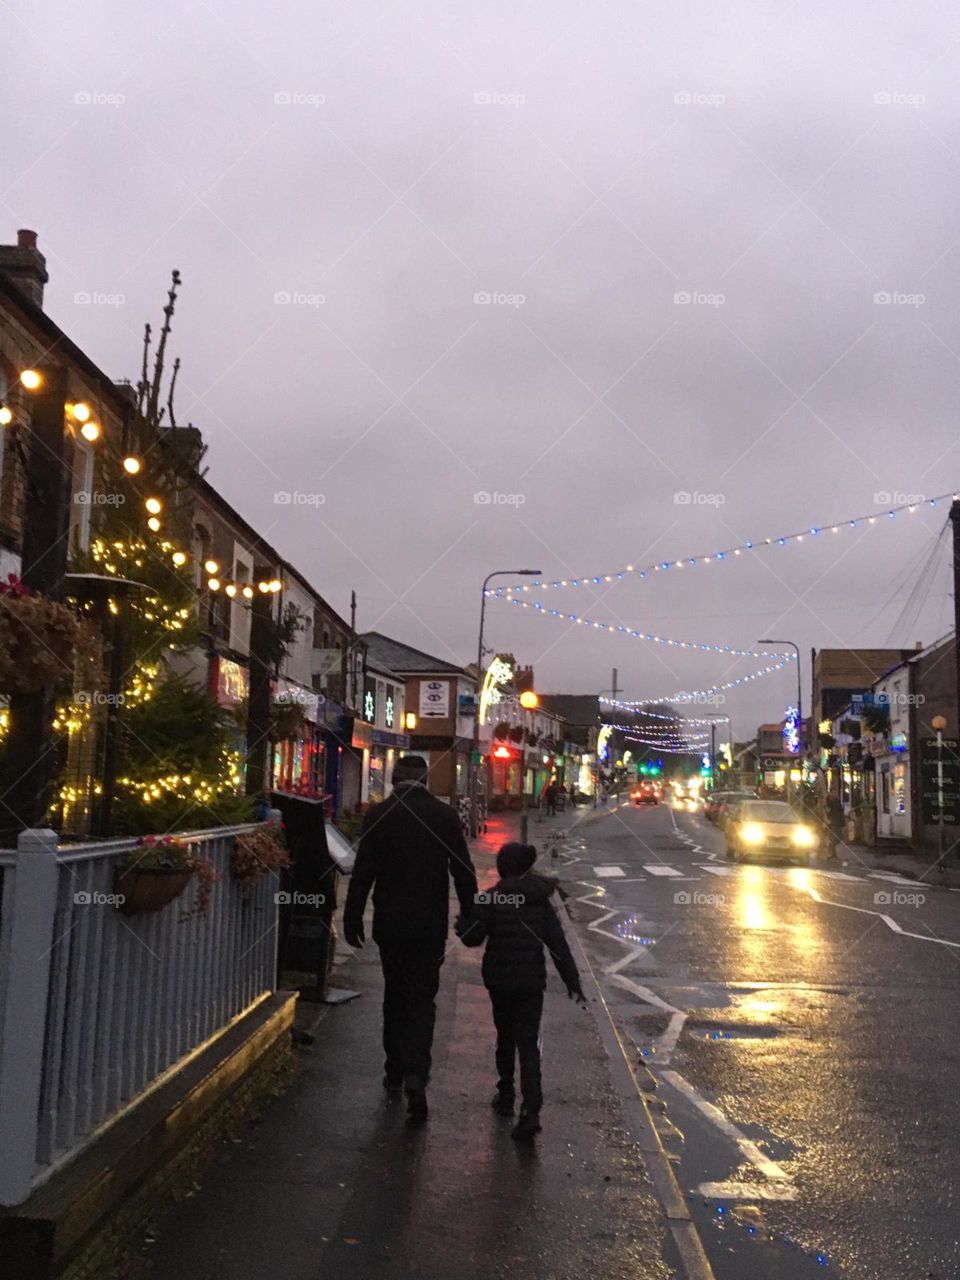 Lights on in the village 